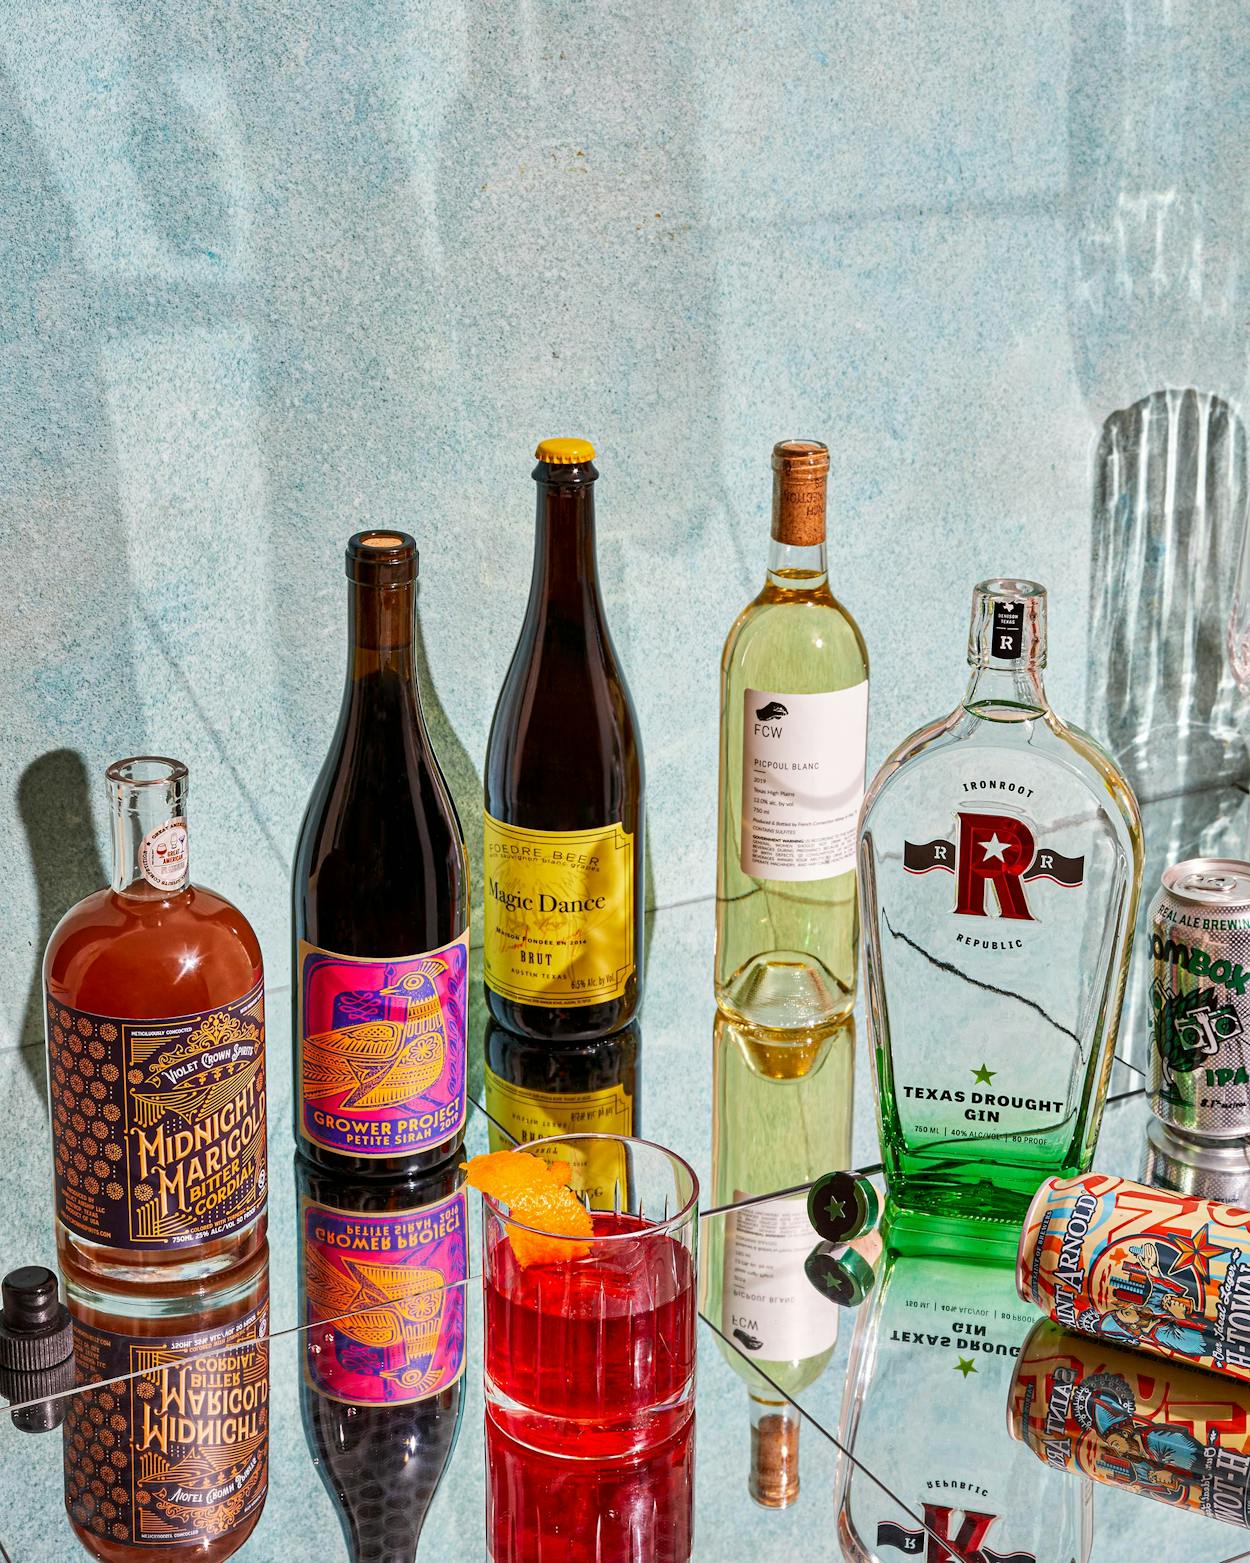 Some of our favorite new Texas wines, beers and spirits.